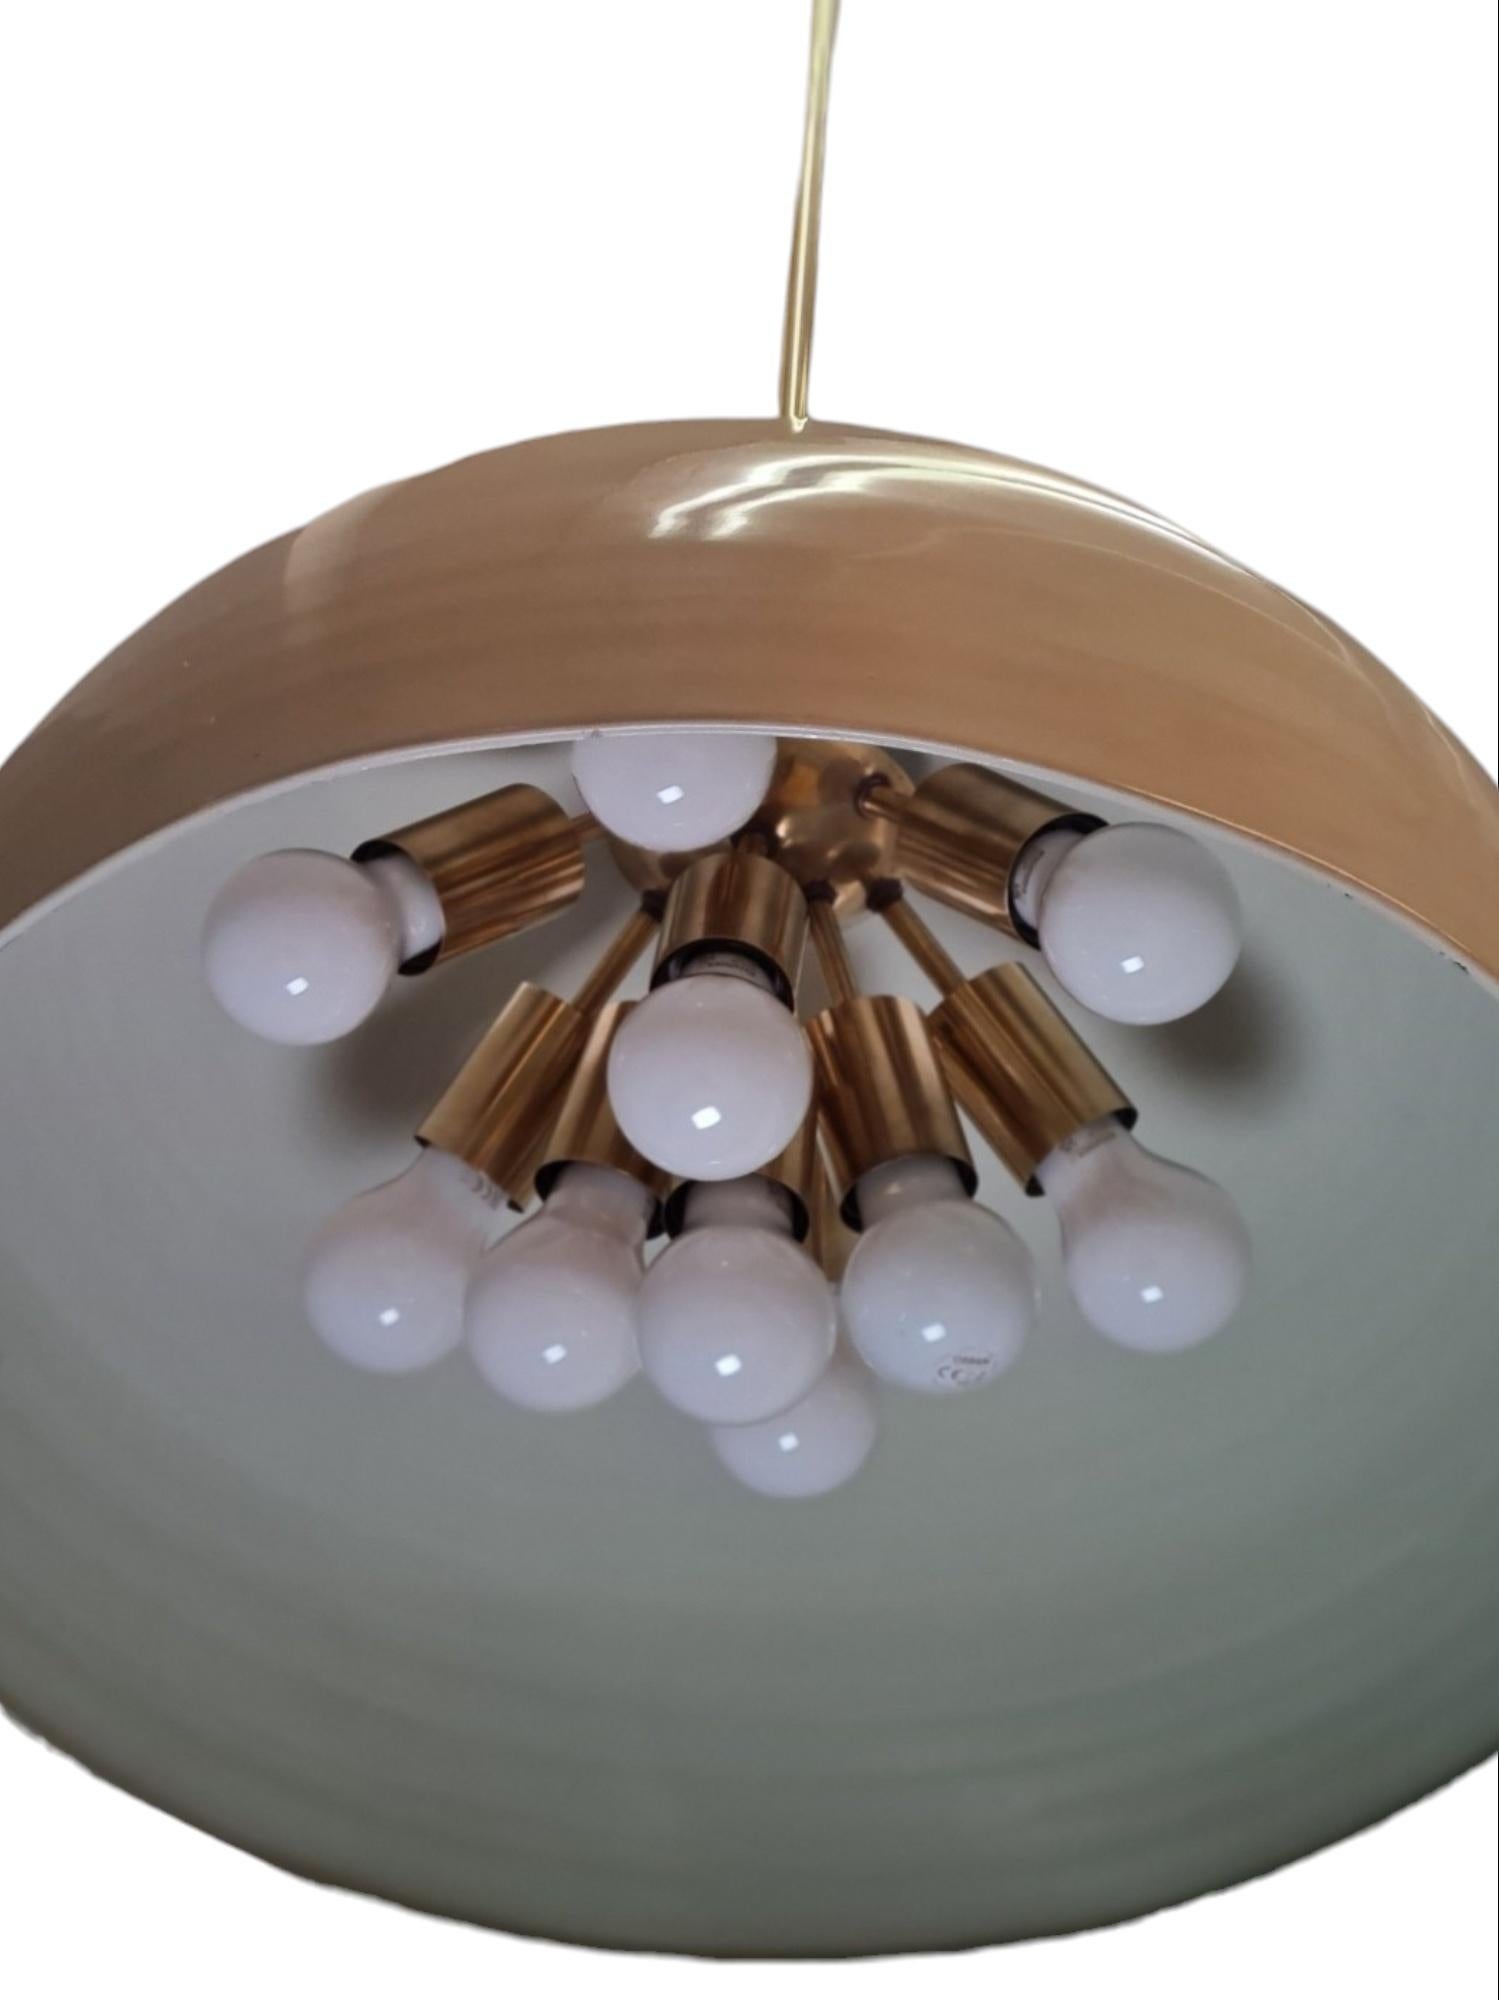 Finnish Paavo Tynell Aulanko Hotel Ceiling Lamp  For Sale